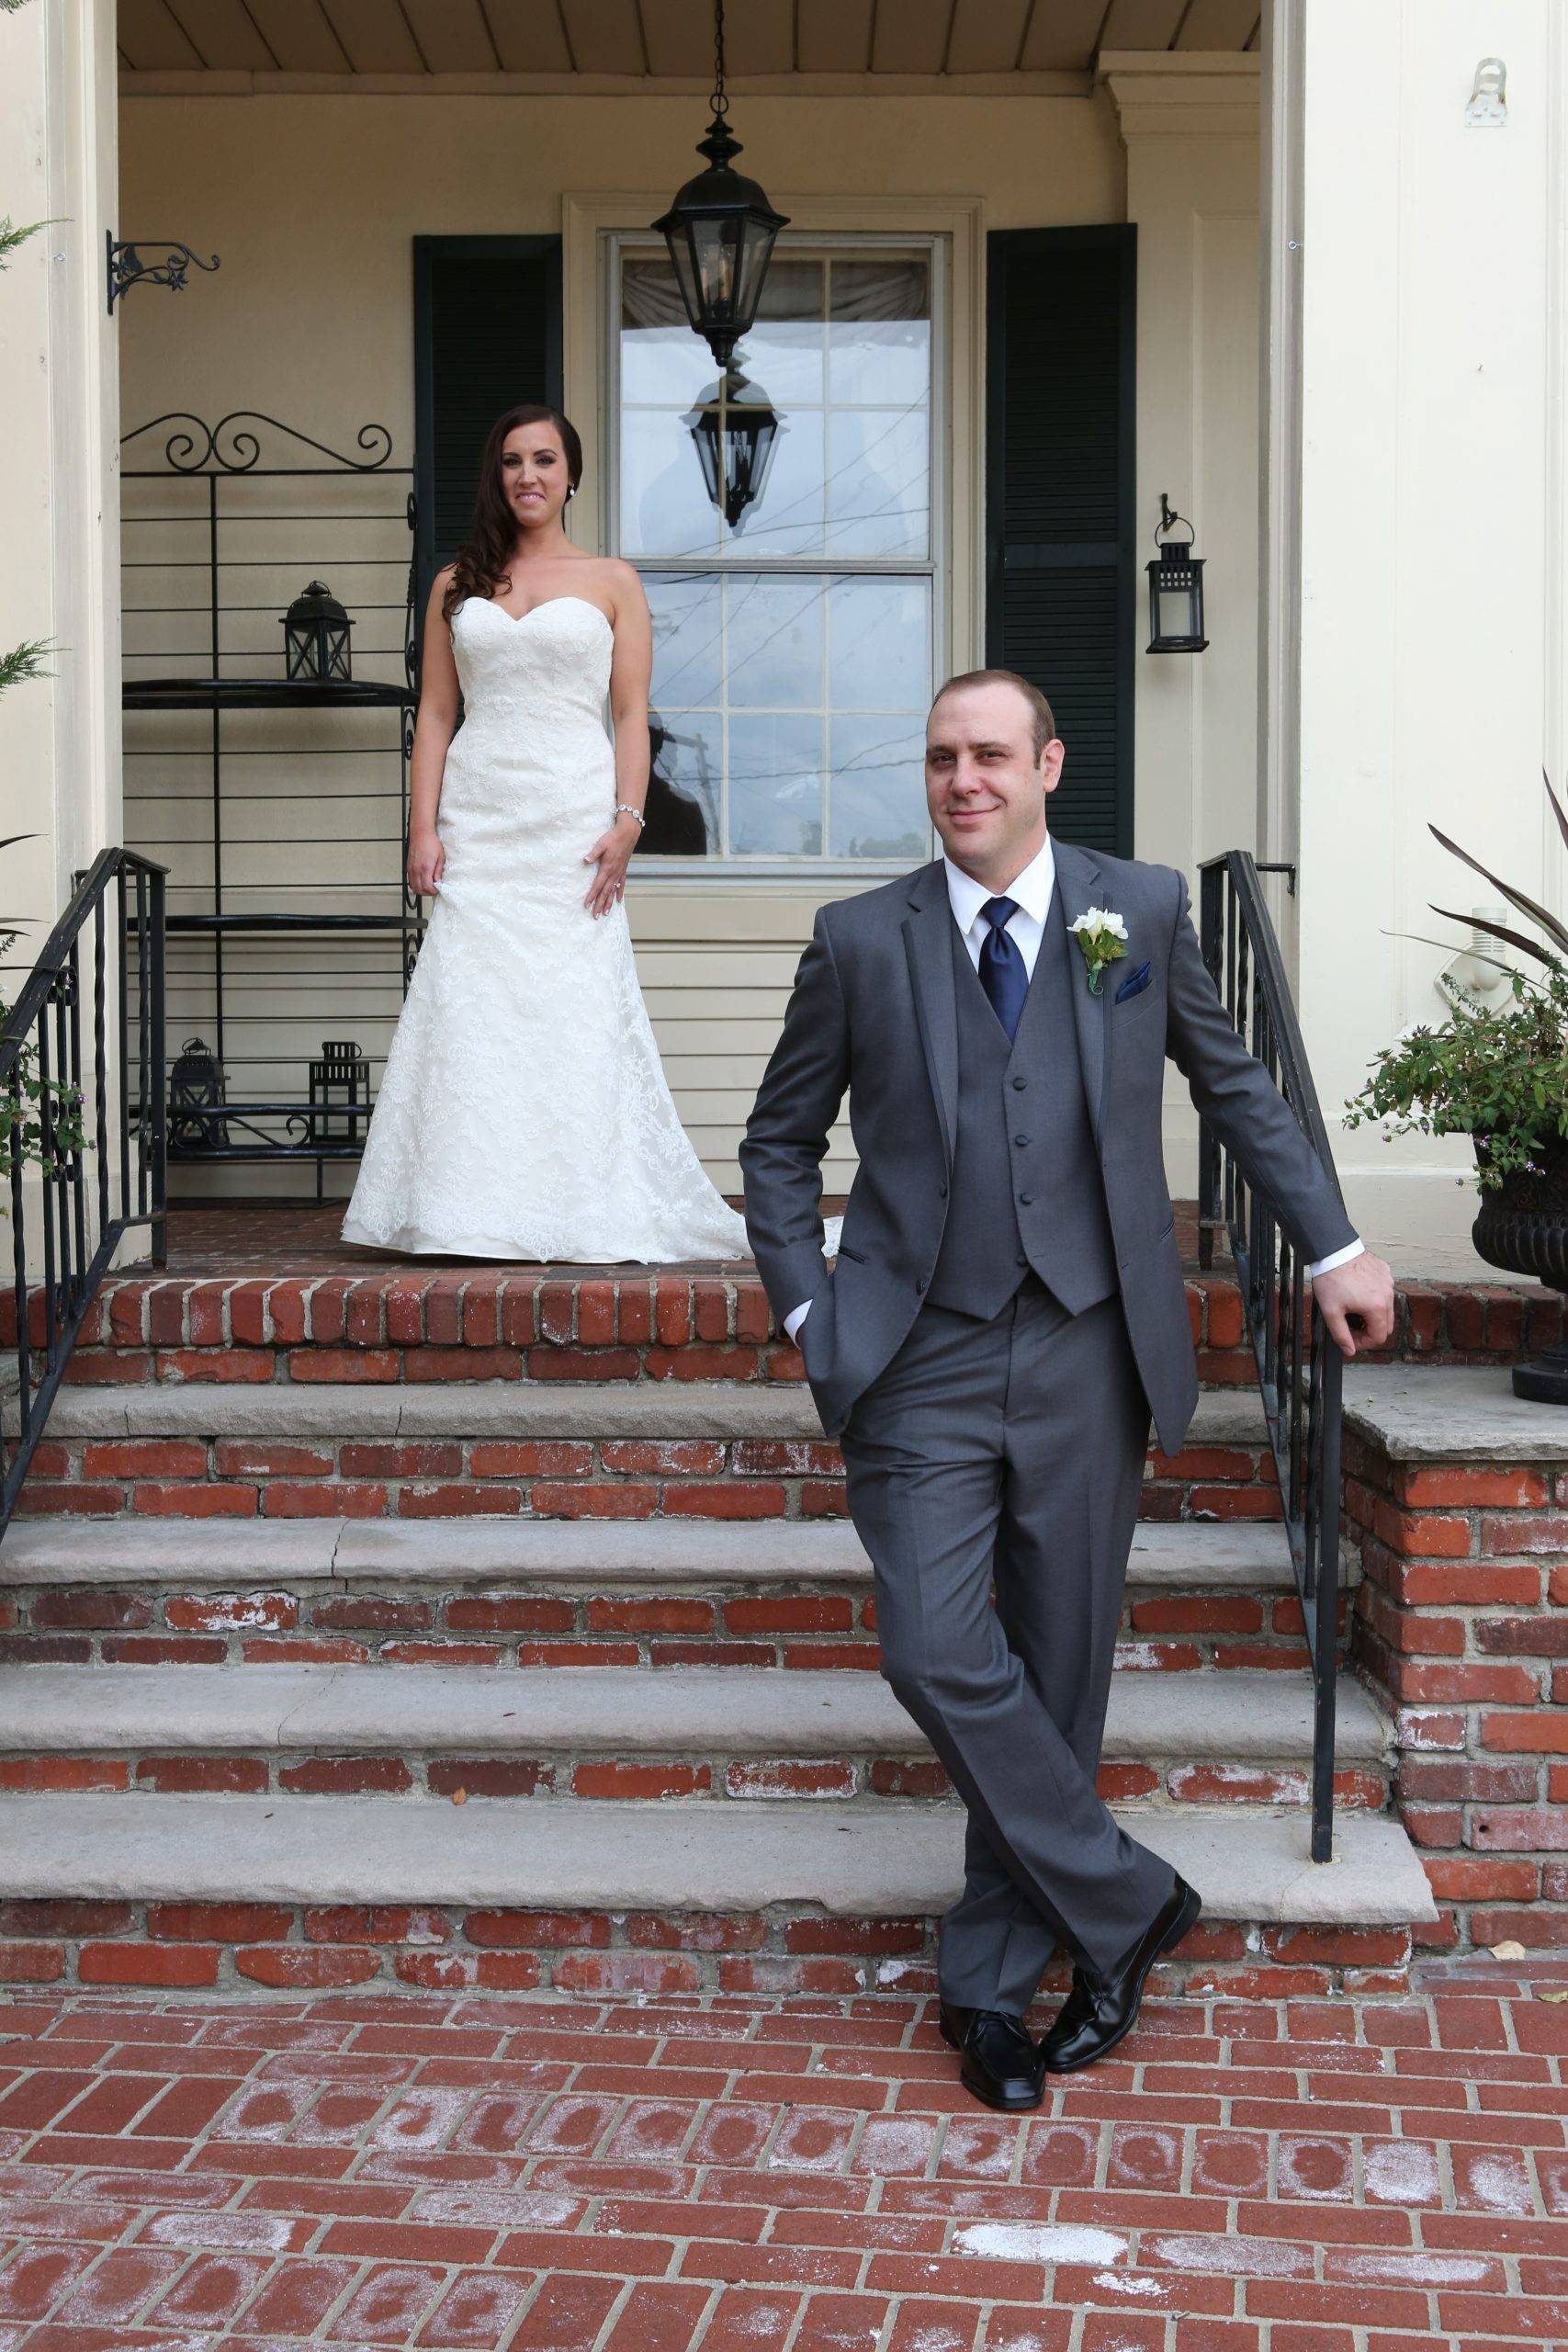 David’s Country Inn bride and groom on front porch steps